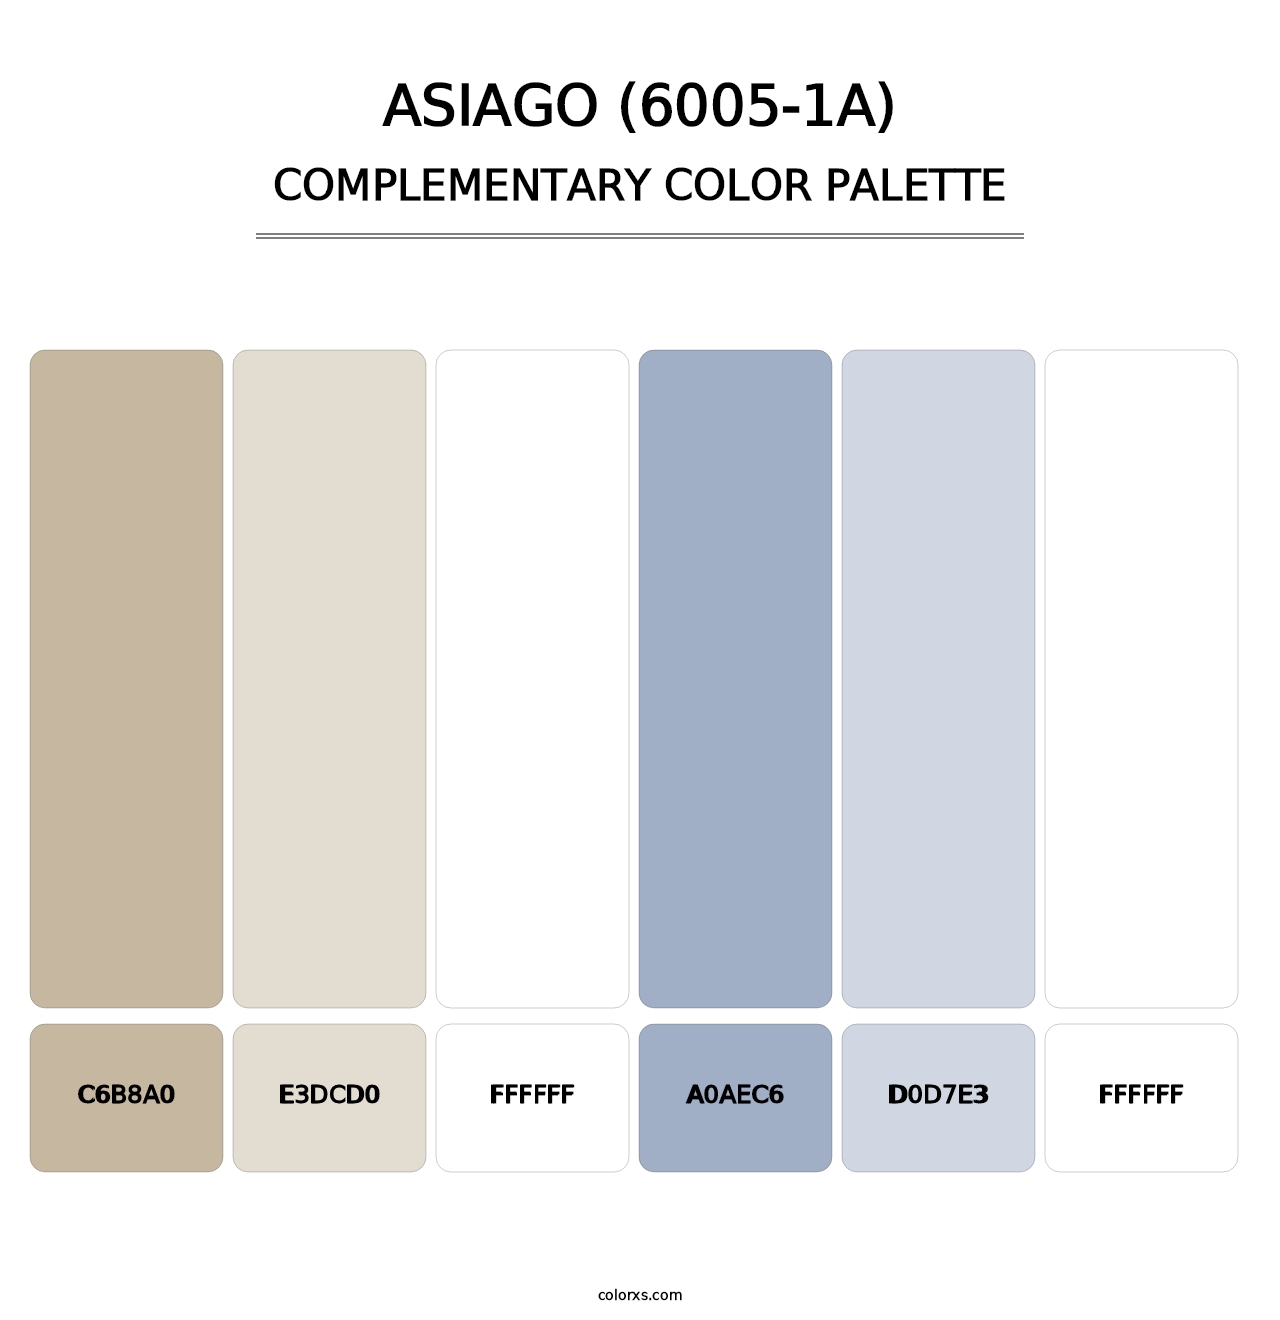 Asiago (6005-1A) - Complementary Color Palette